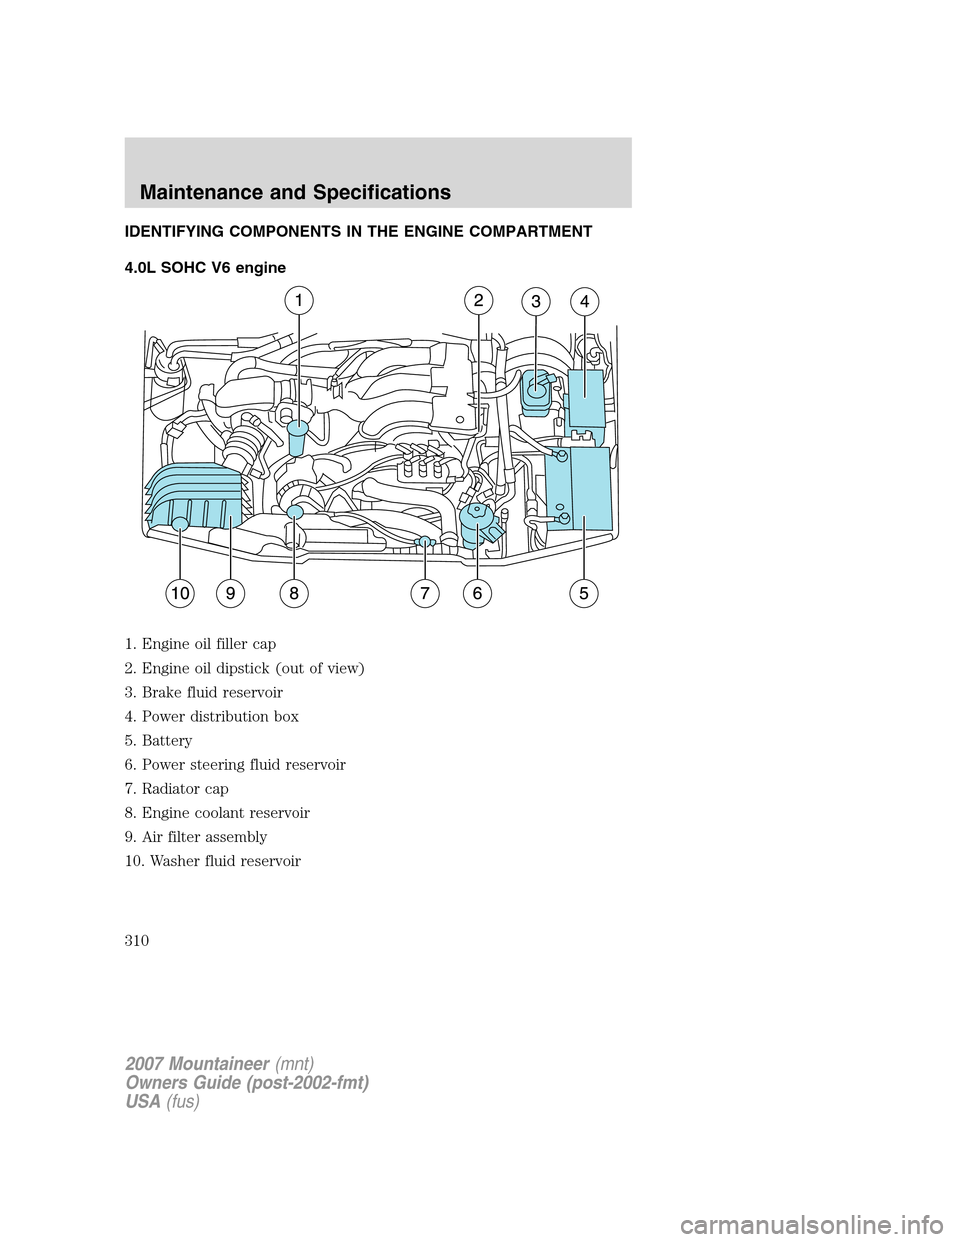 Mercury Mountaineer 2007  Owners Manuals IDENTIFYING COMPONENTS IN THE ENGINE COMPARTMENT
4.0L SOHC V6 engine
1. Engine oil filler cap
2. Engine oil dipstick (out of view)
3. Brake fluid reservoir
4. Power distribution box
5. Battery
6. Powe